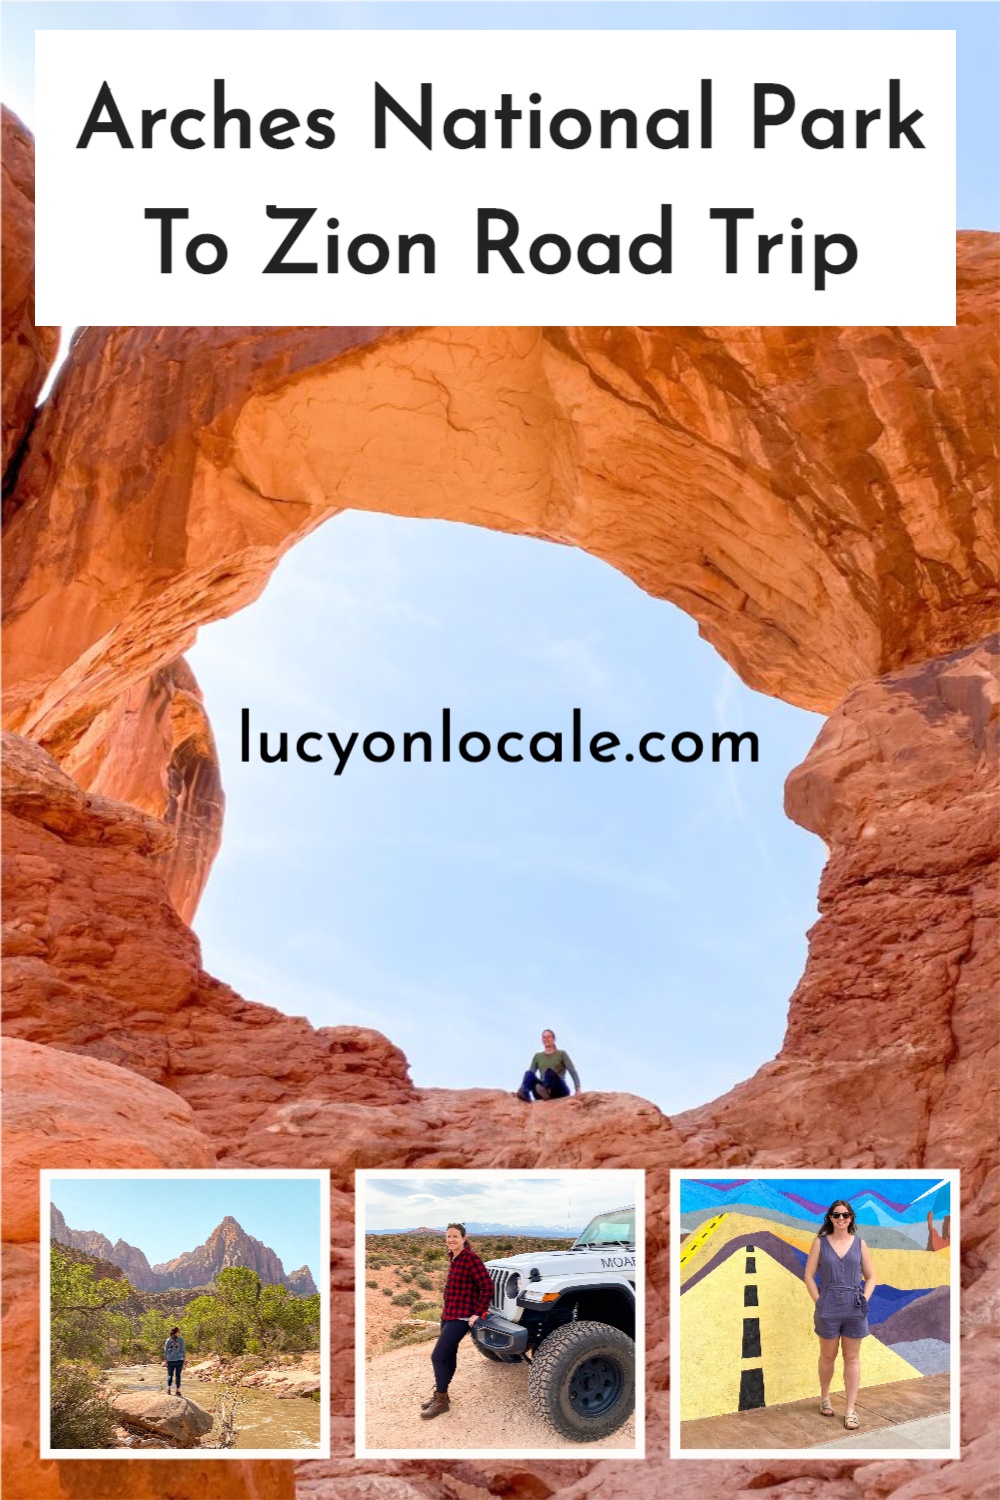 Arches National Park To Zion road trip